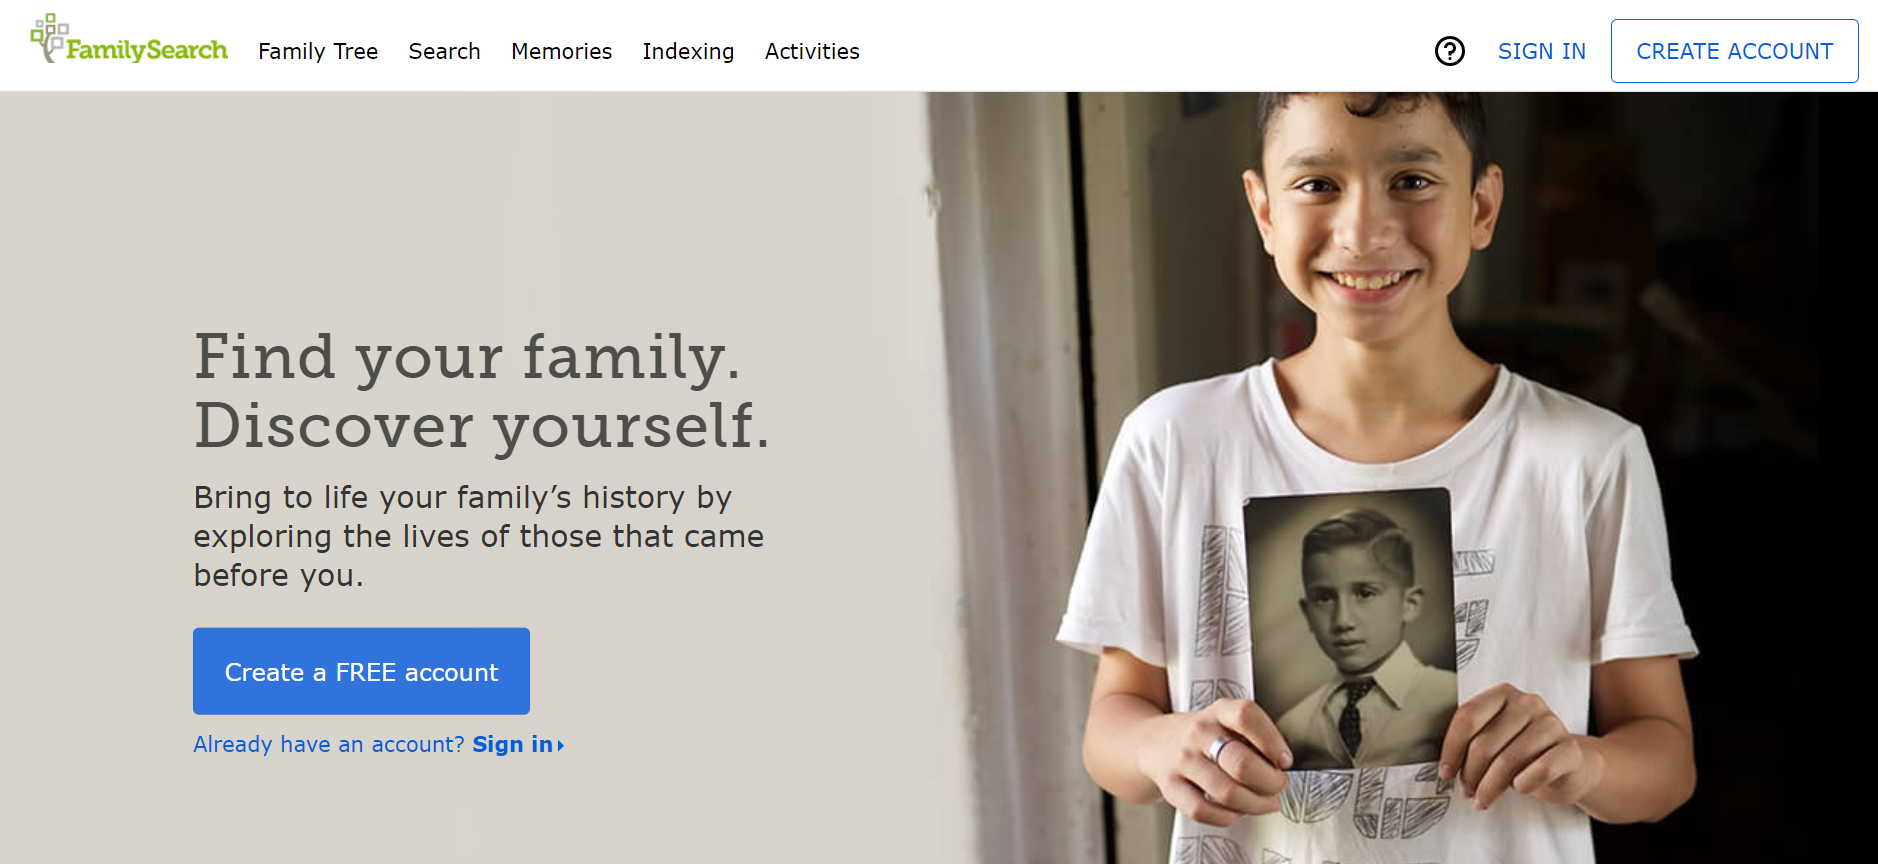 FamilySearch homepage